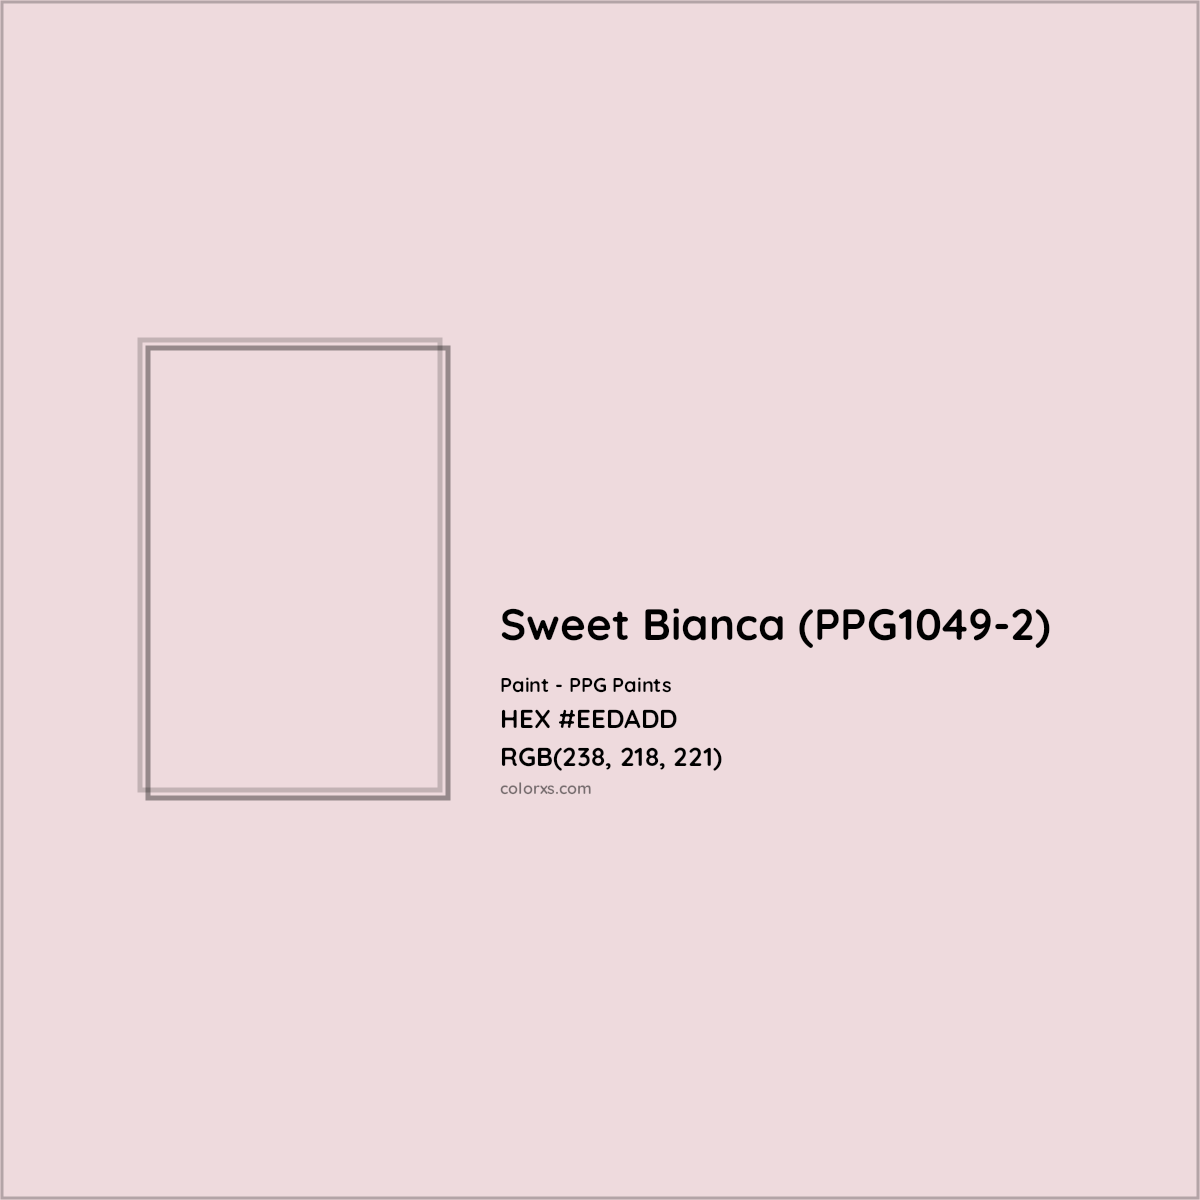 HEX #EEDADD Sweet Bianca (PPG1049-2) Paint PPG Paints - Color Code